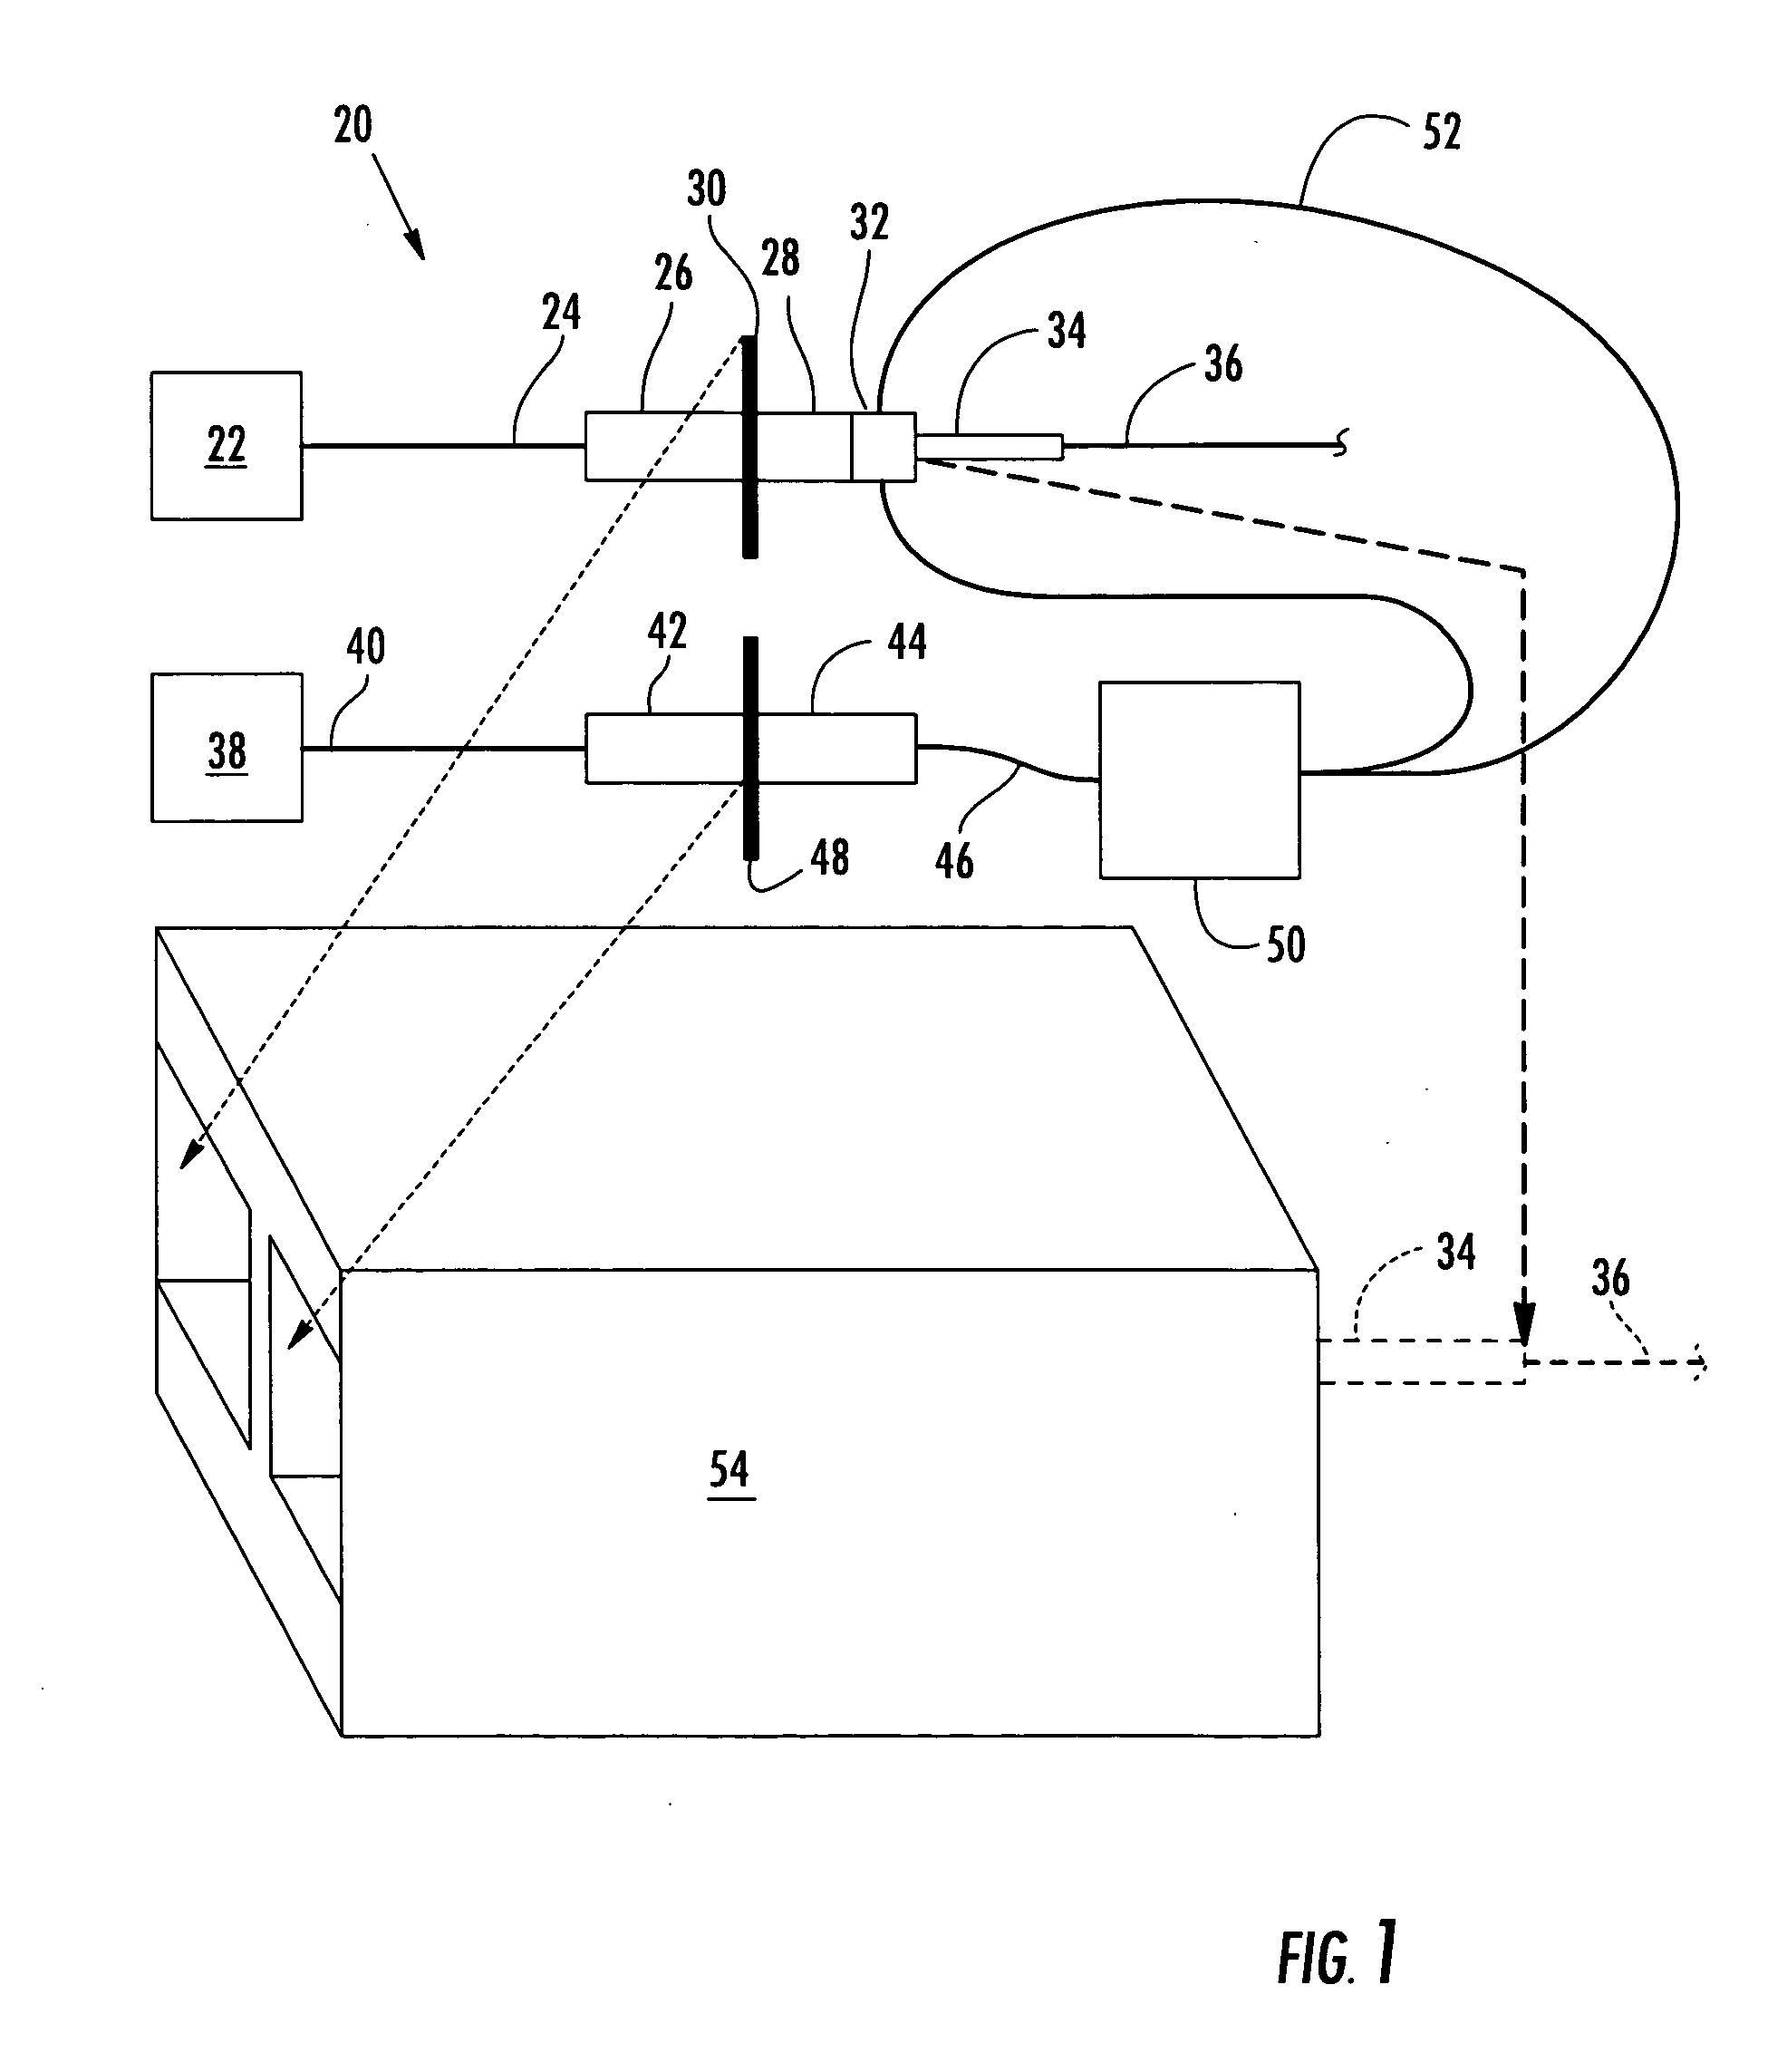 Methods and apparatus for estimating optical insertion loss